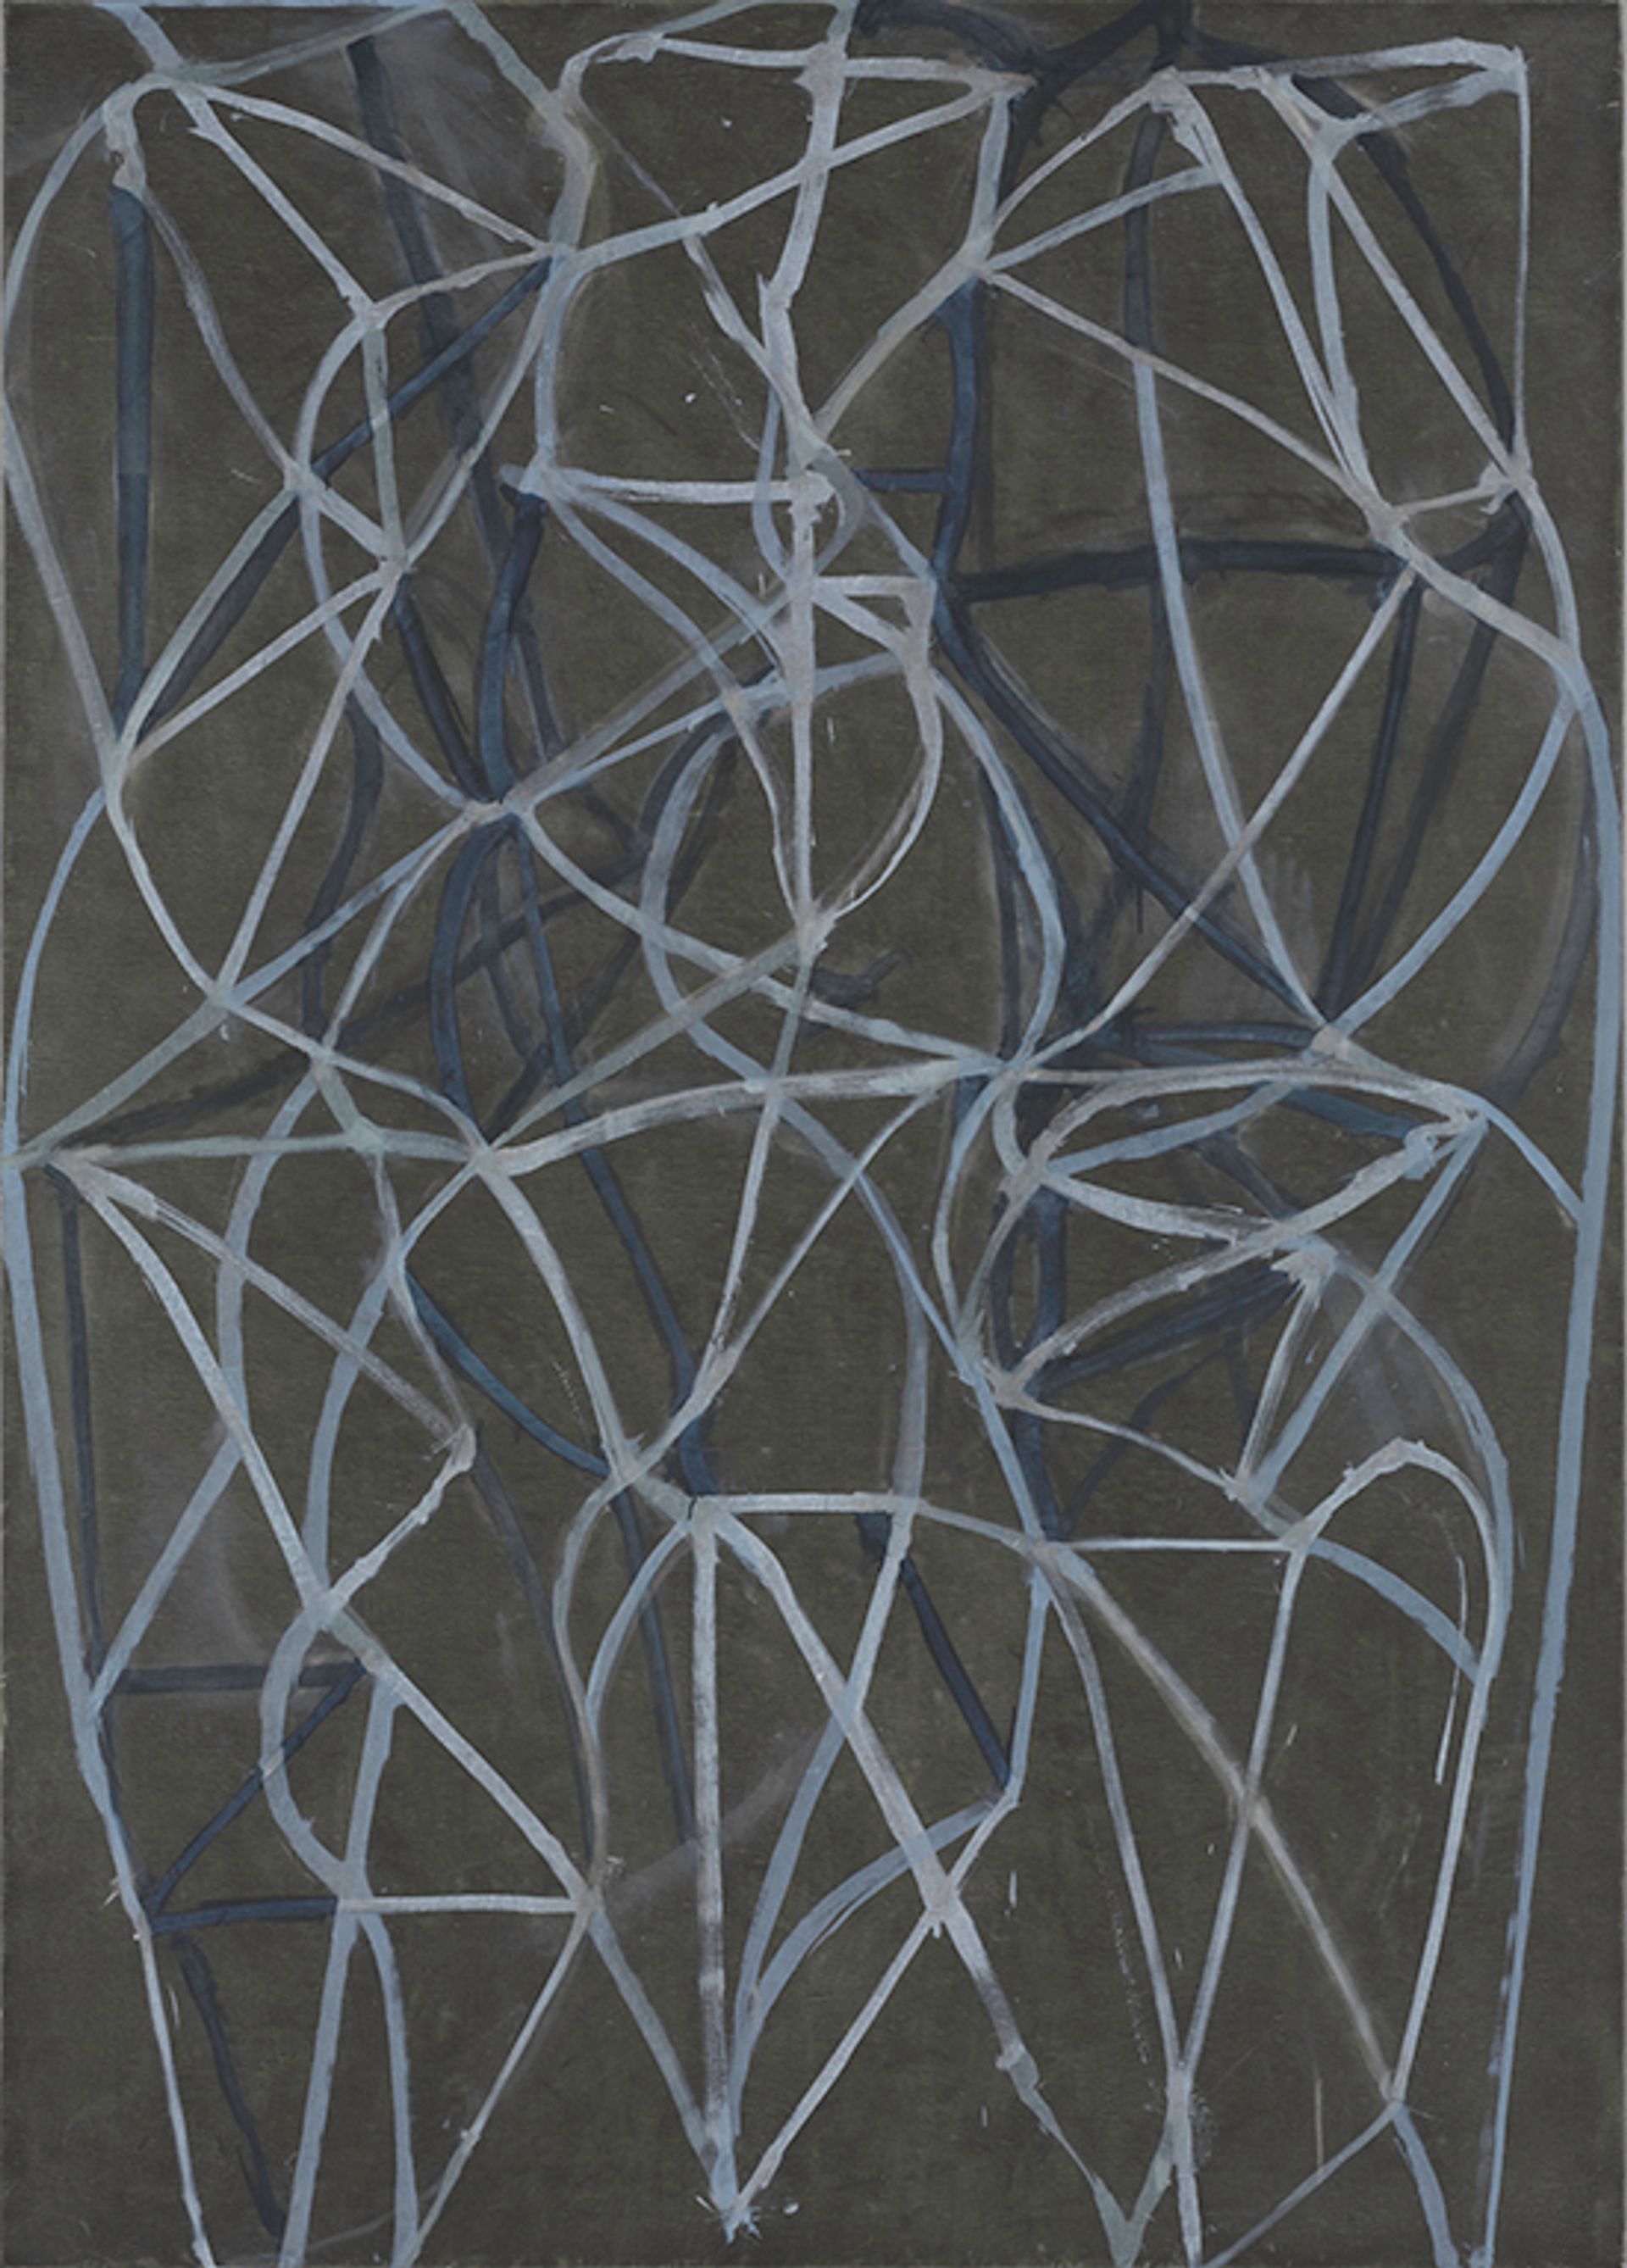 The Baltimore Museum of Art's 3 (1987-88) by Brice Marden, withdrawn from the block at Sotheby's Courtesy of Baltimore Museum of Art